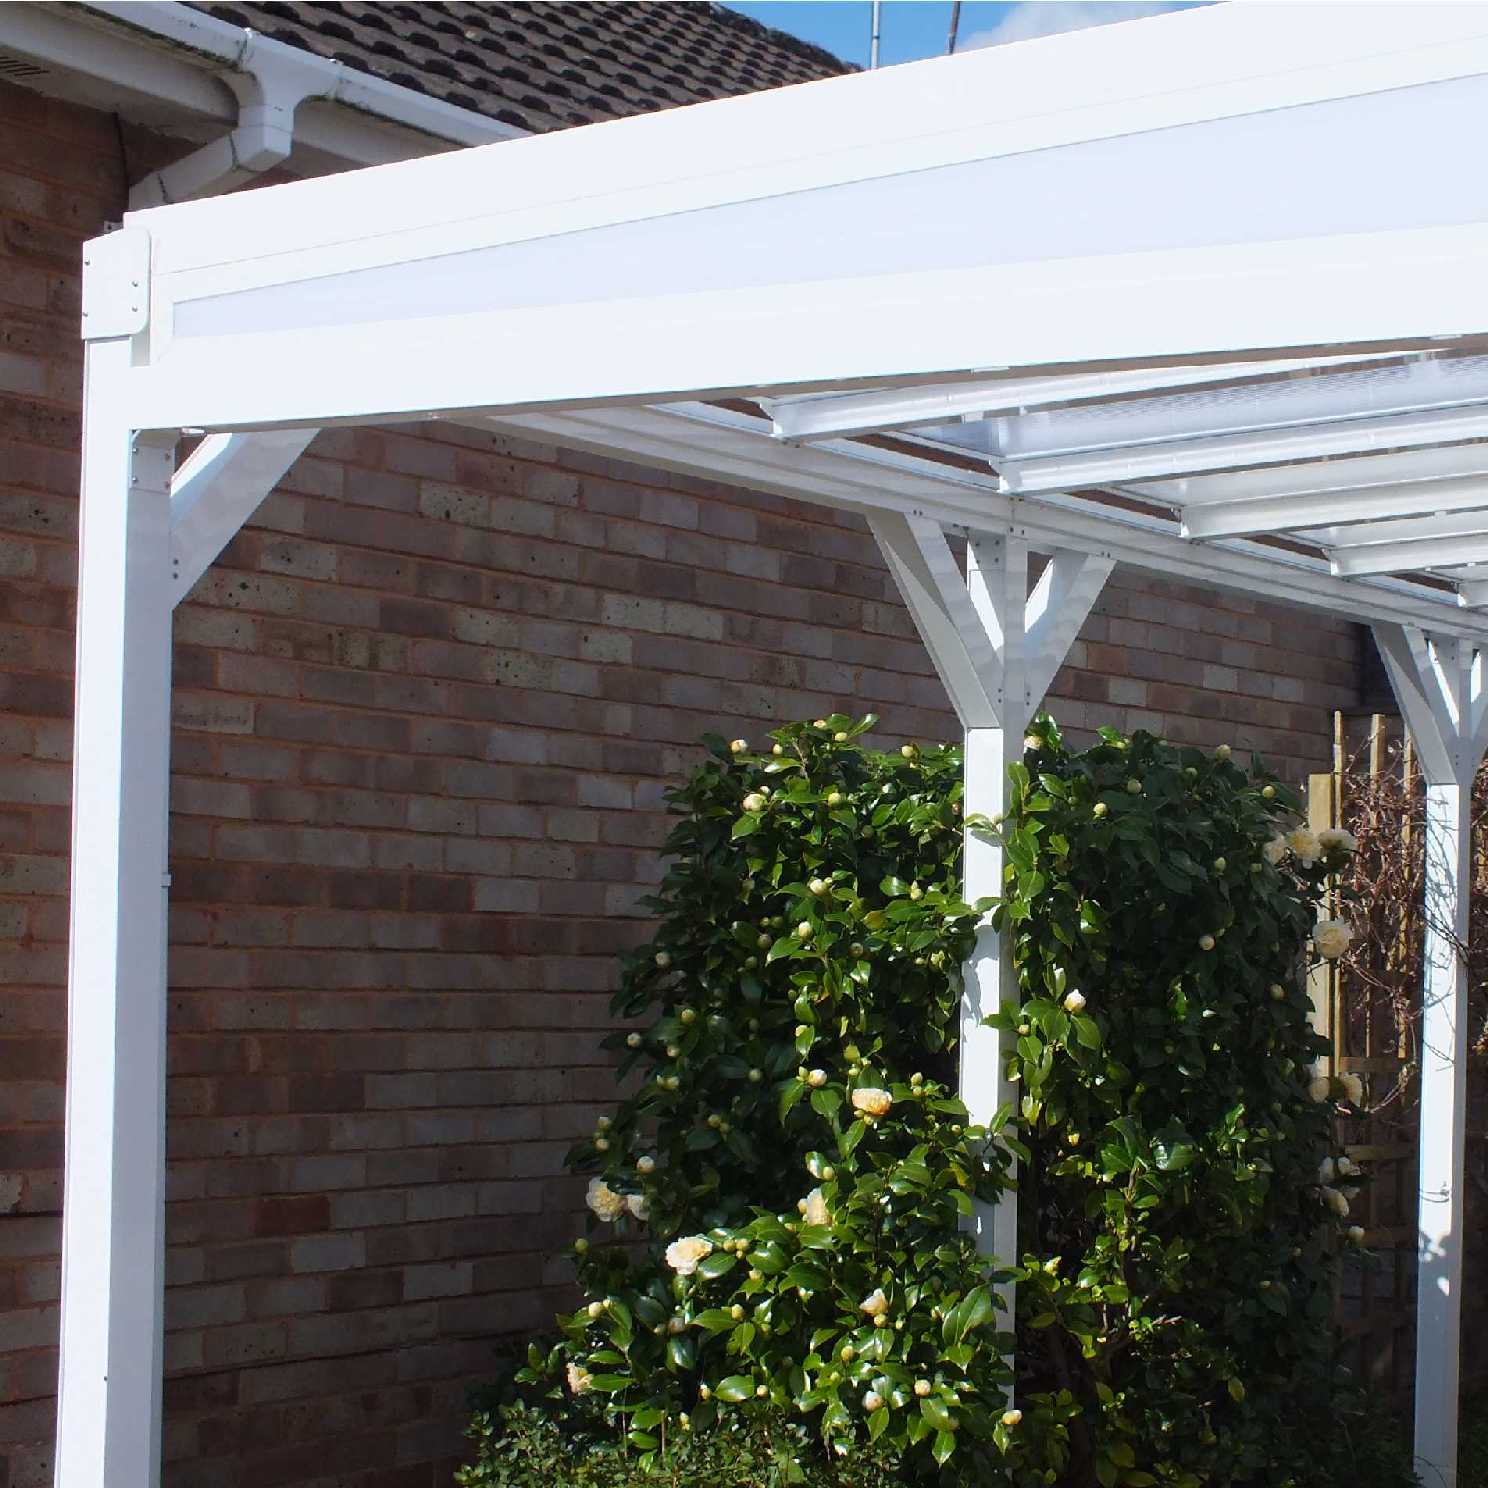 Omega Smart Lean-To Canopy, White with 16mm Polycarbonate Glazing - 7.4m (W) x 2.5m (P), (4) Supporting Posts from Omega Build